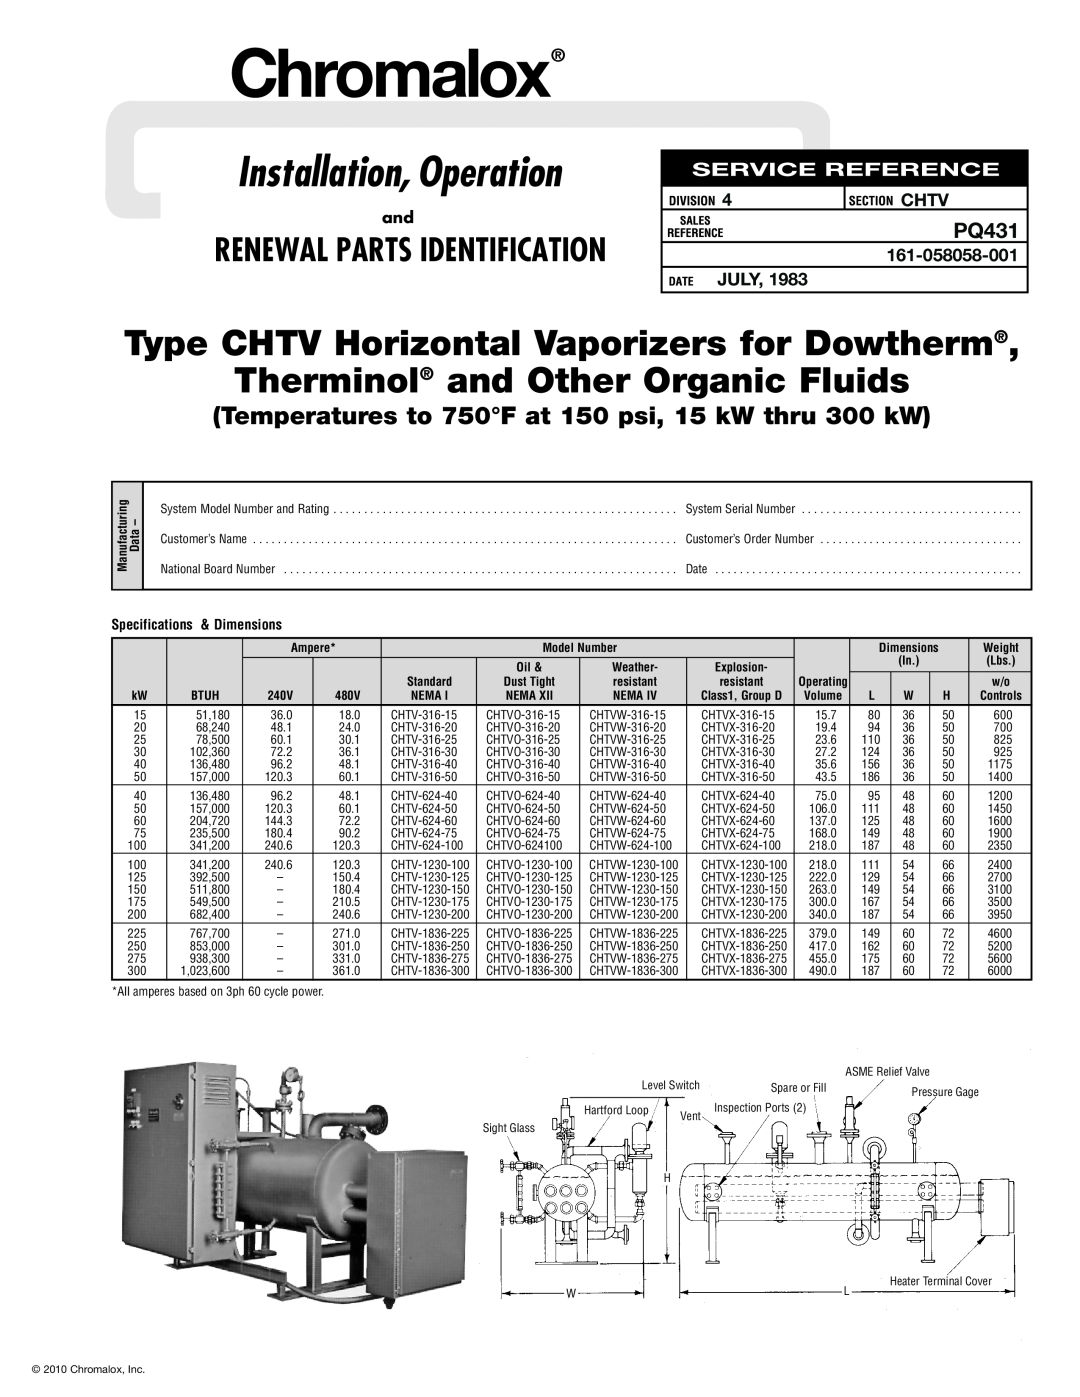 Chromalox PQ431 specifications Chtv, July, Installation, Operation, Type CHTV Horizontal Vaporizers for Dowtherm 